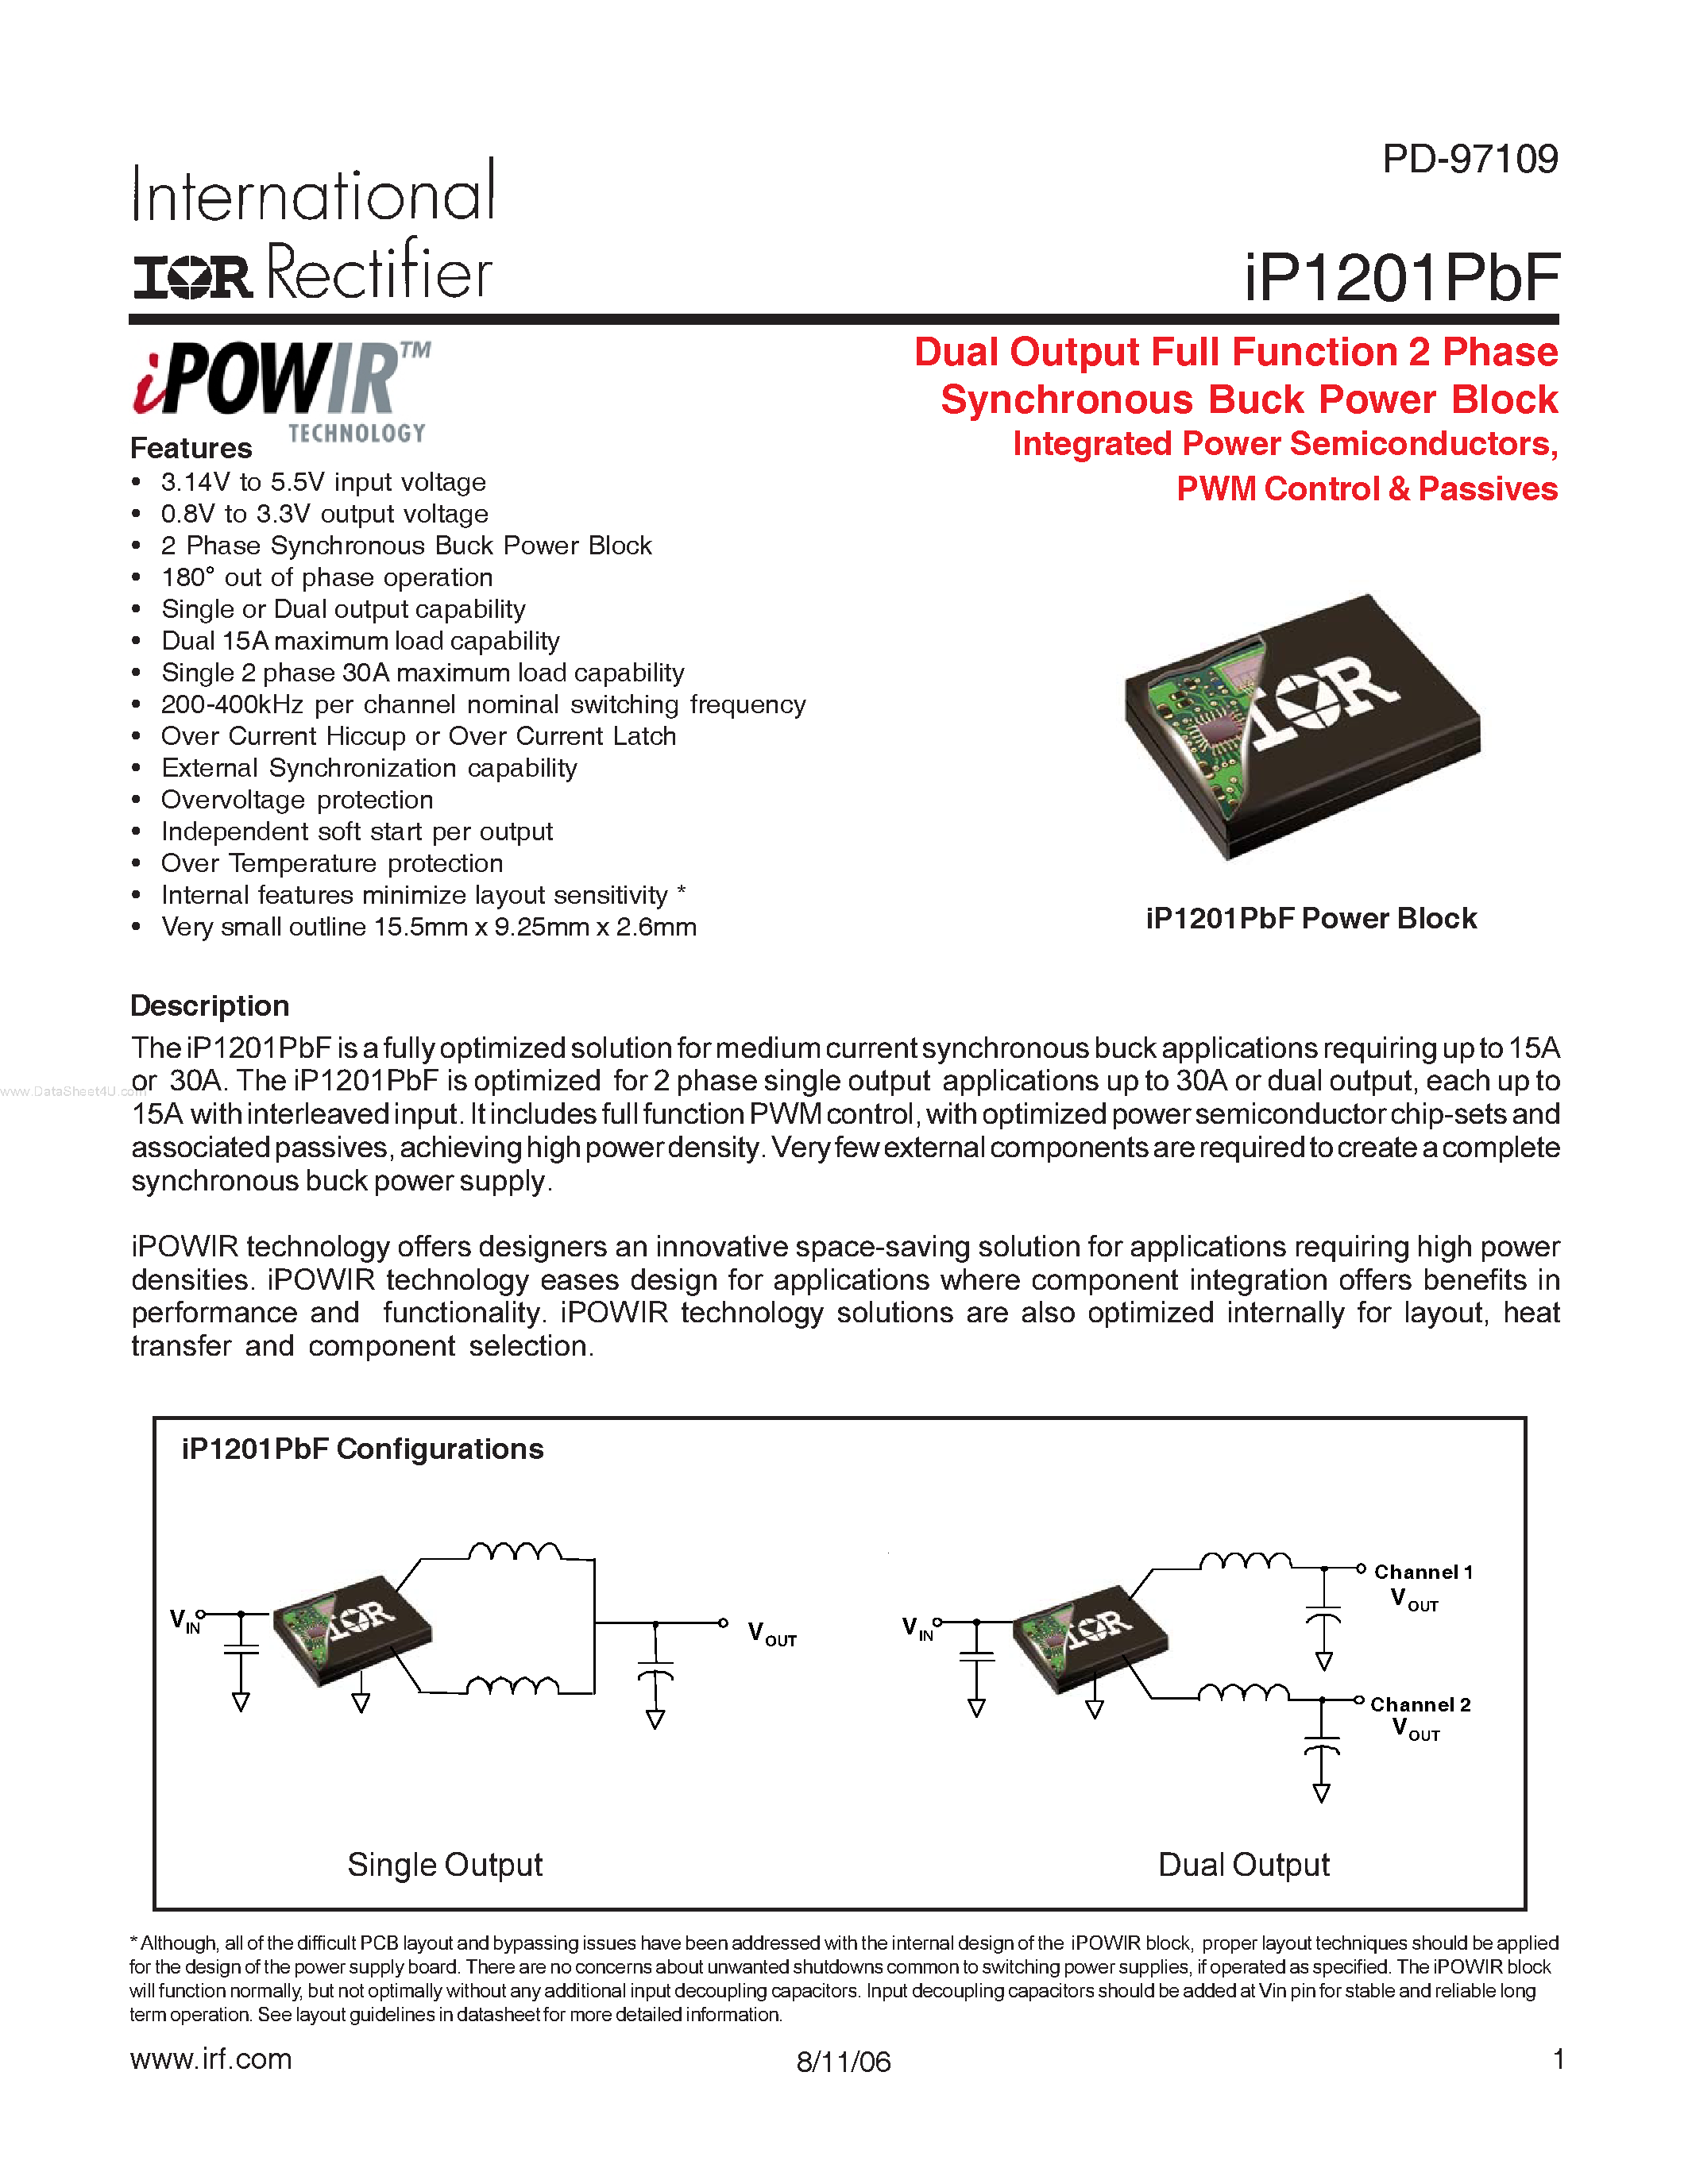 Datasheet IP1201PBF - Dual Output Full Function 2 Phase Synchronous Buck Power Block Integrated Power Semiconductors page 1